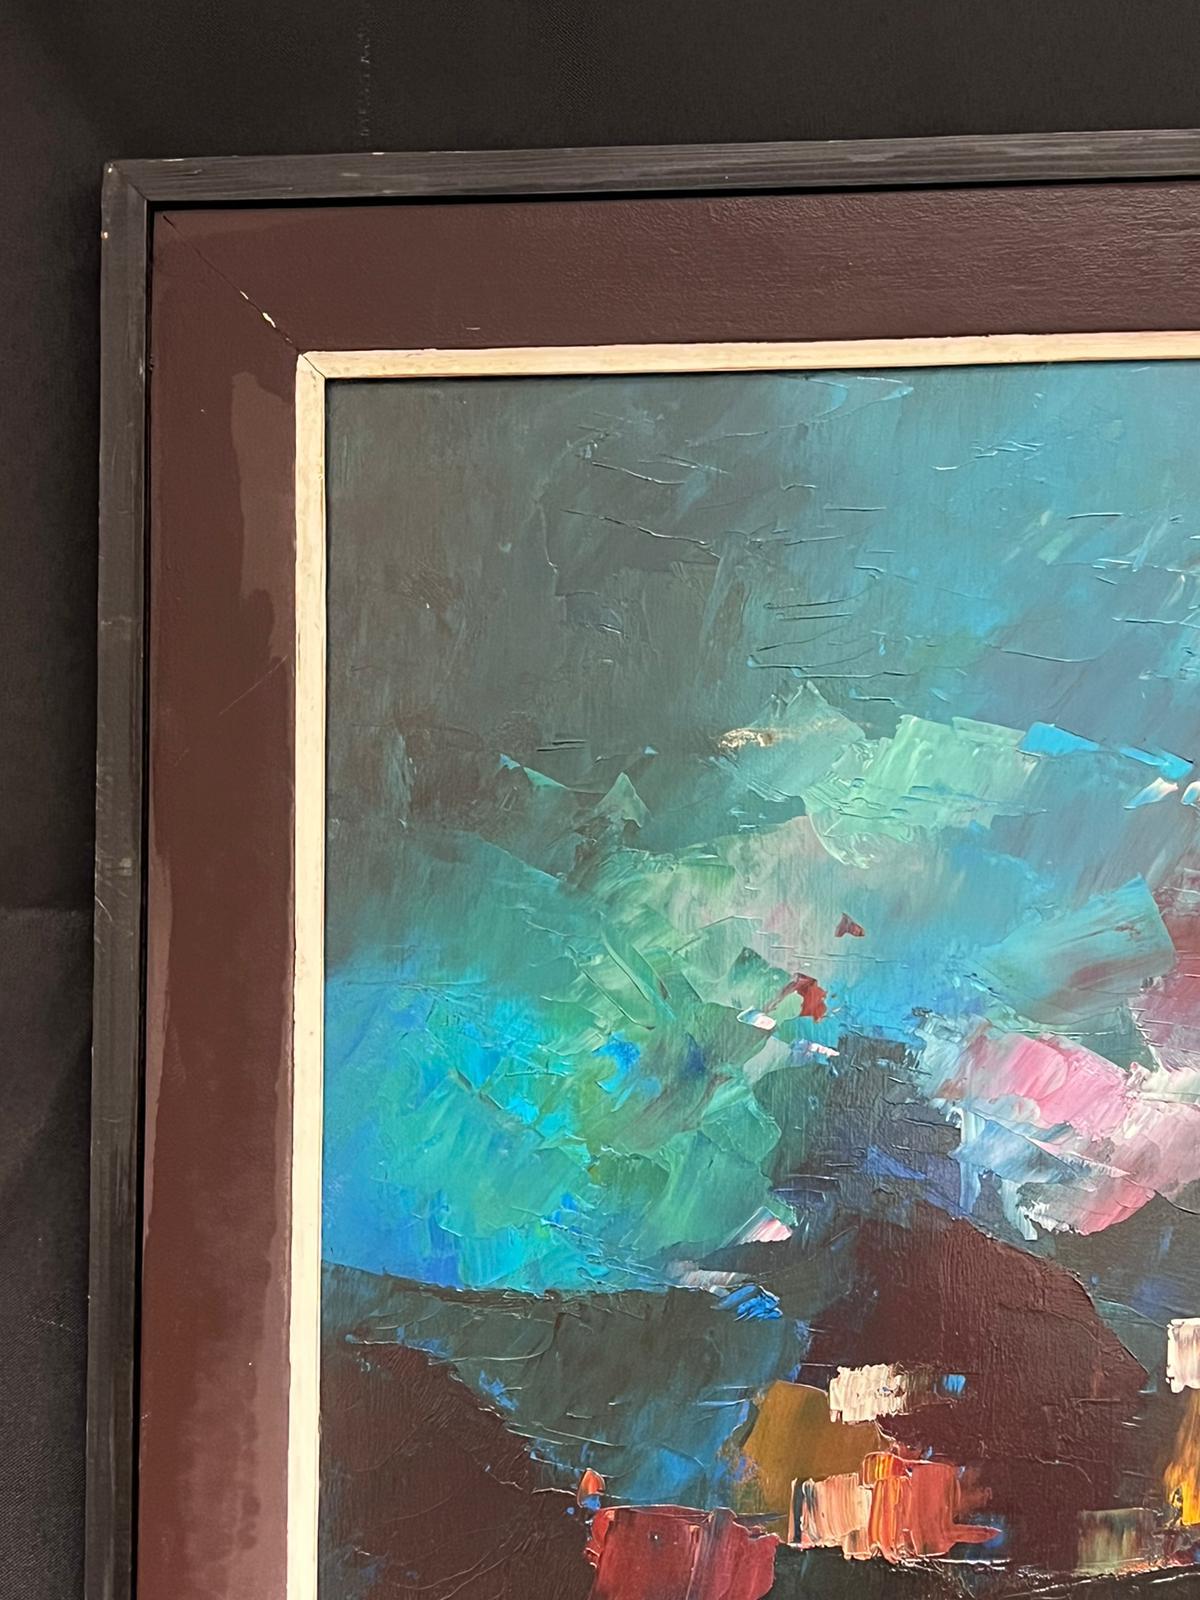 Abstract Expressionist Composition
by Gerard Guegueniat (French 1970's)
signed oil painting on board, 
framed: 40 x 24.5 inches
board: 36 x 21 inches
provenance: private collection, France
condition: very good and sound condition, minor surface